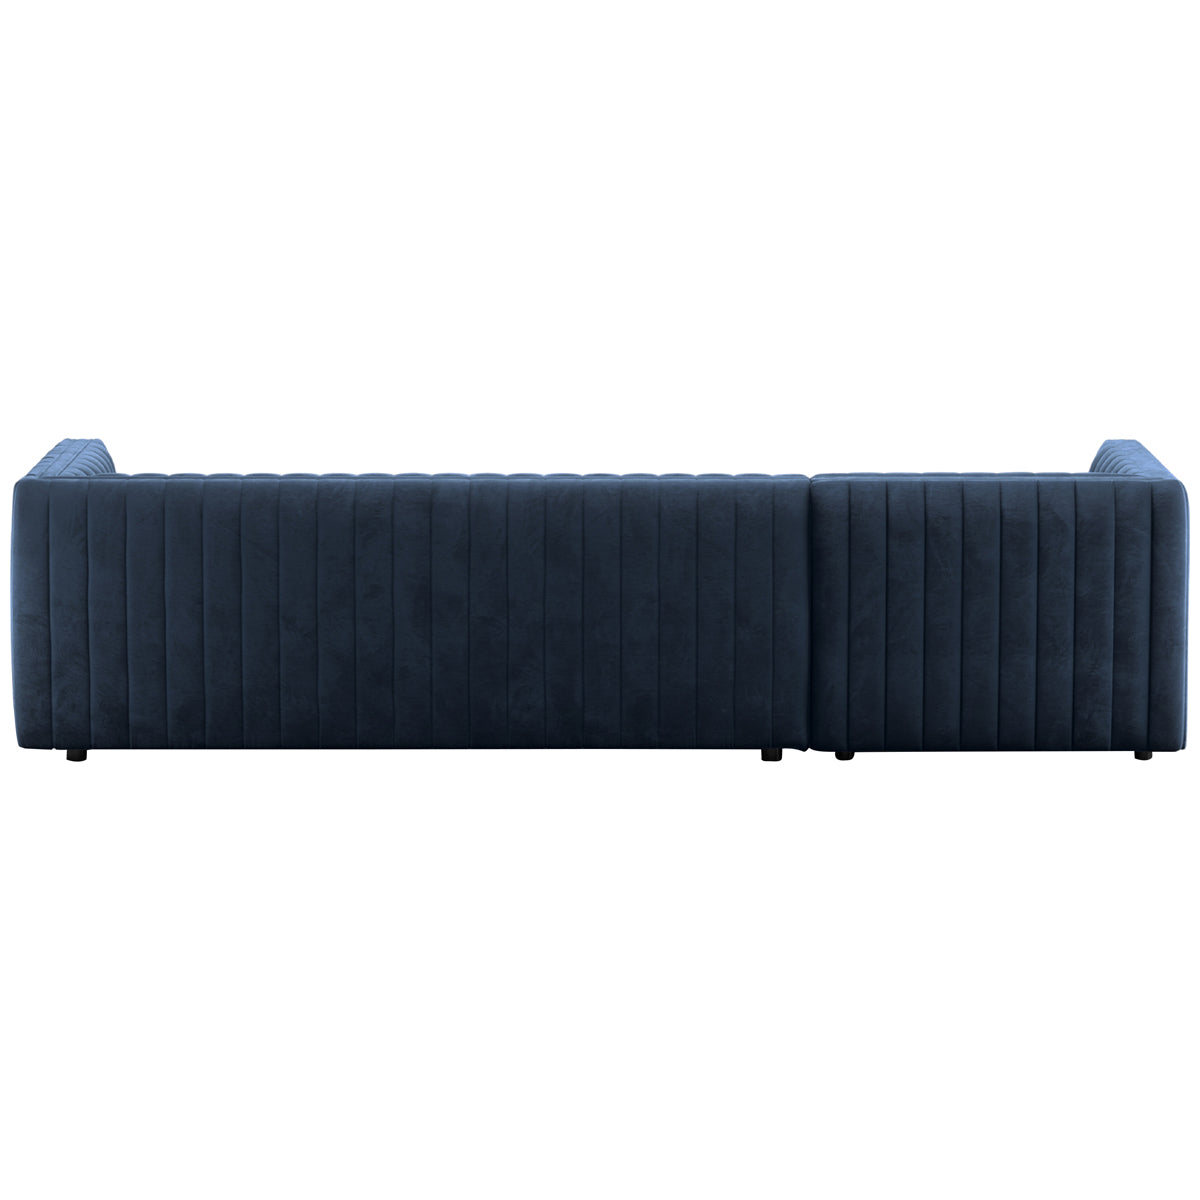 Four Hands Grayson Augustine 2-Piece Sectional